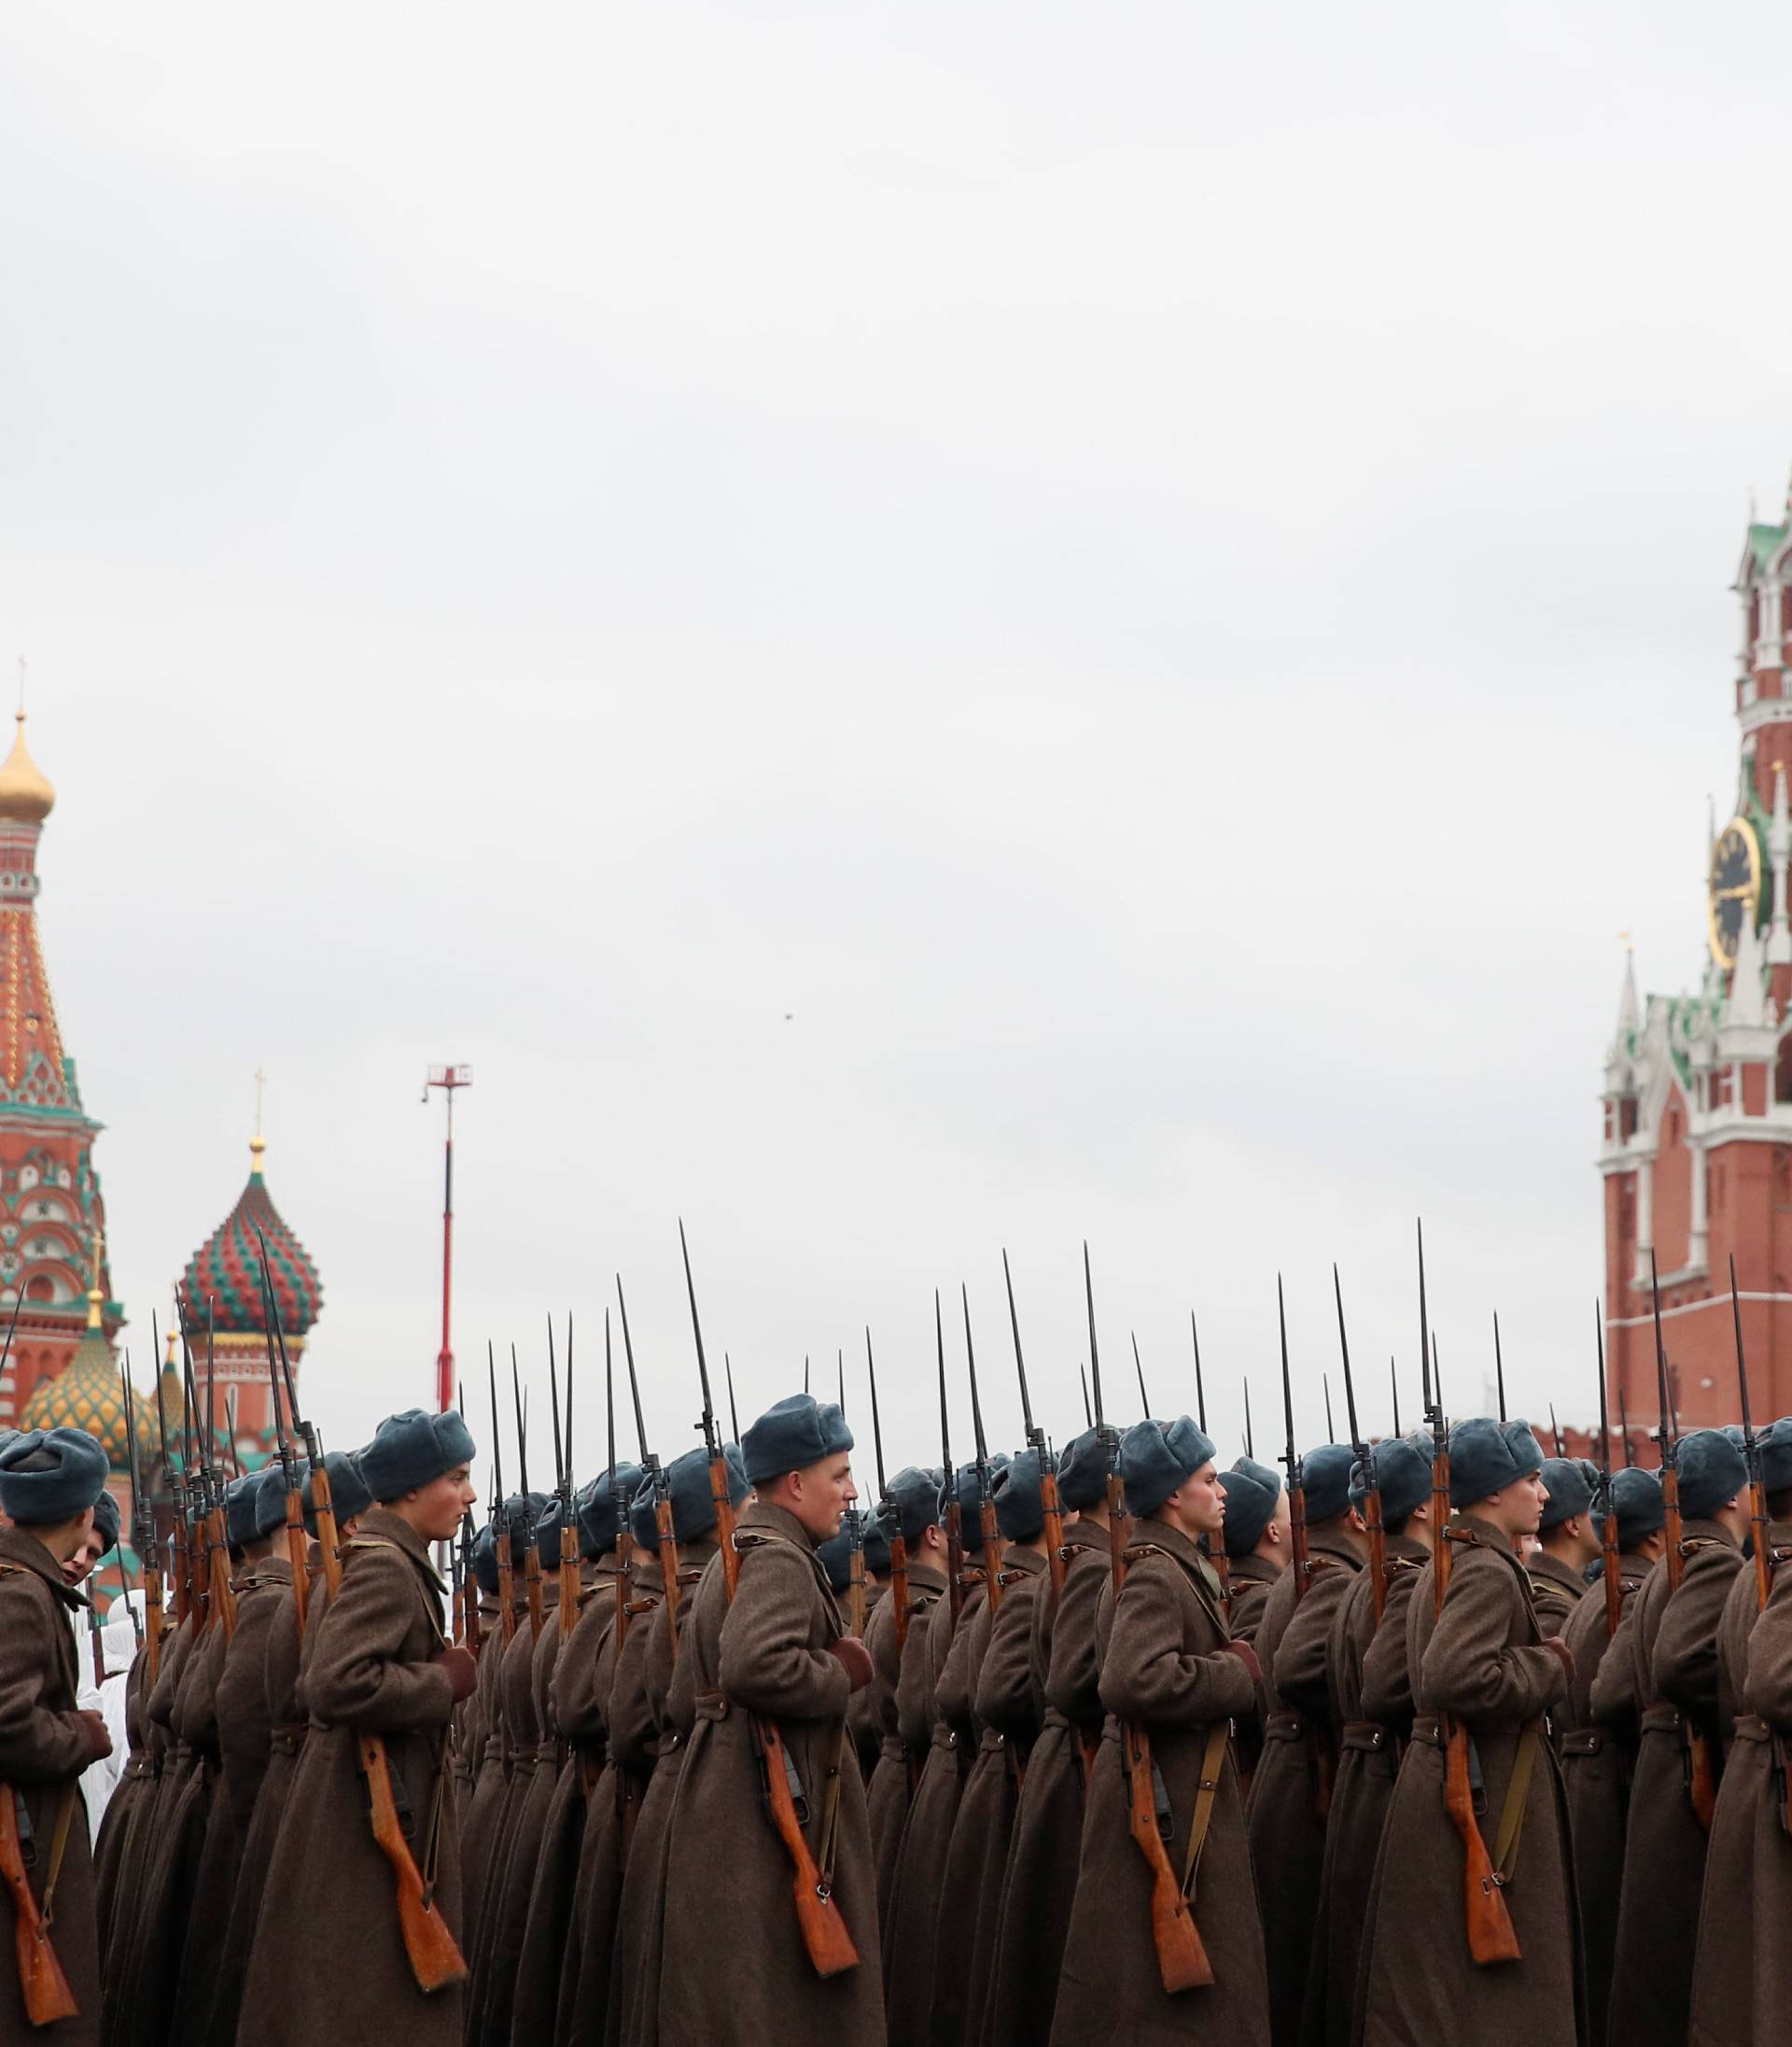 Russian servicemen dressed in historical uniform wait before a military parade marking the anniversary of the 1941 parade, when Soviet soldiers marched towards the front lines of World War Two, at Red Square in Moscow